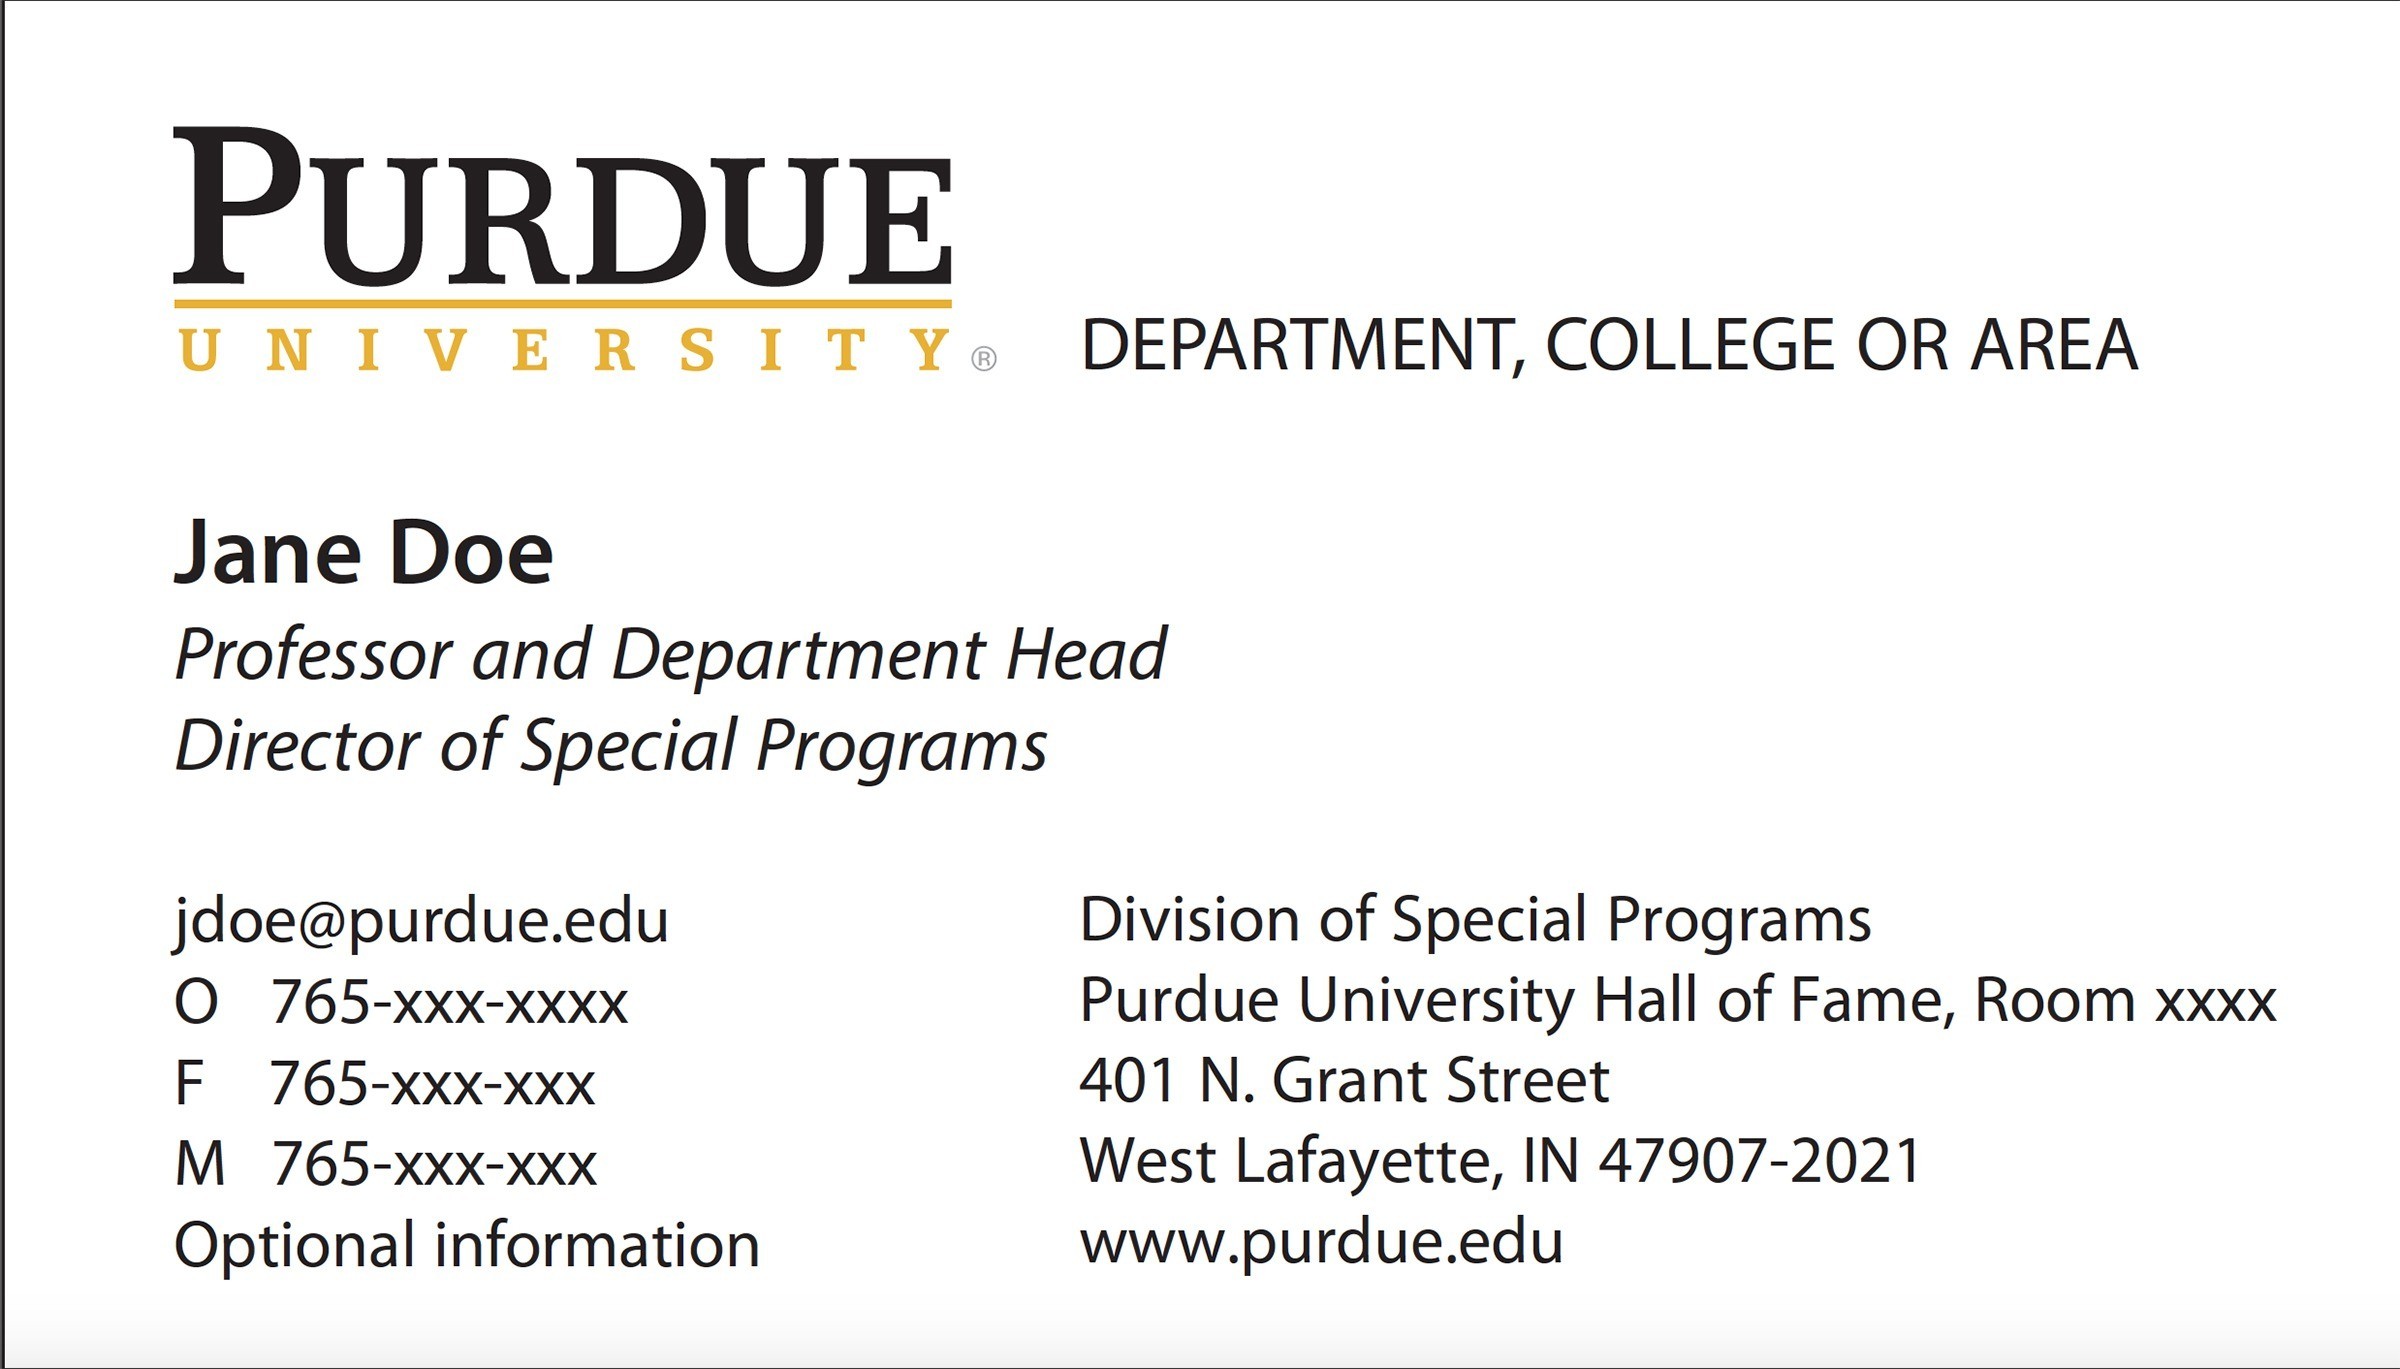 New Business Card Template Now Online - Purdue University News Intended For Graduate Student Business Cards Template